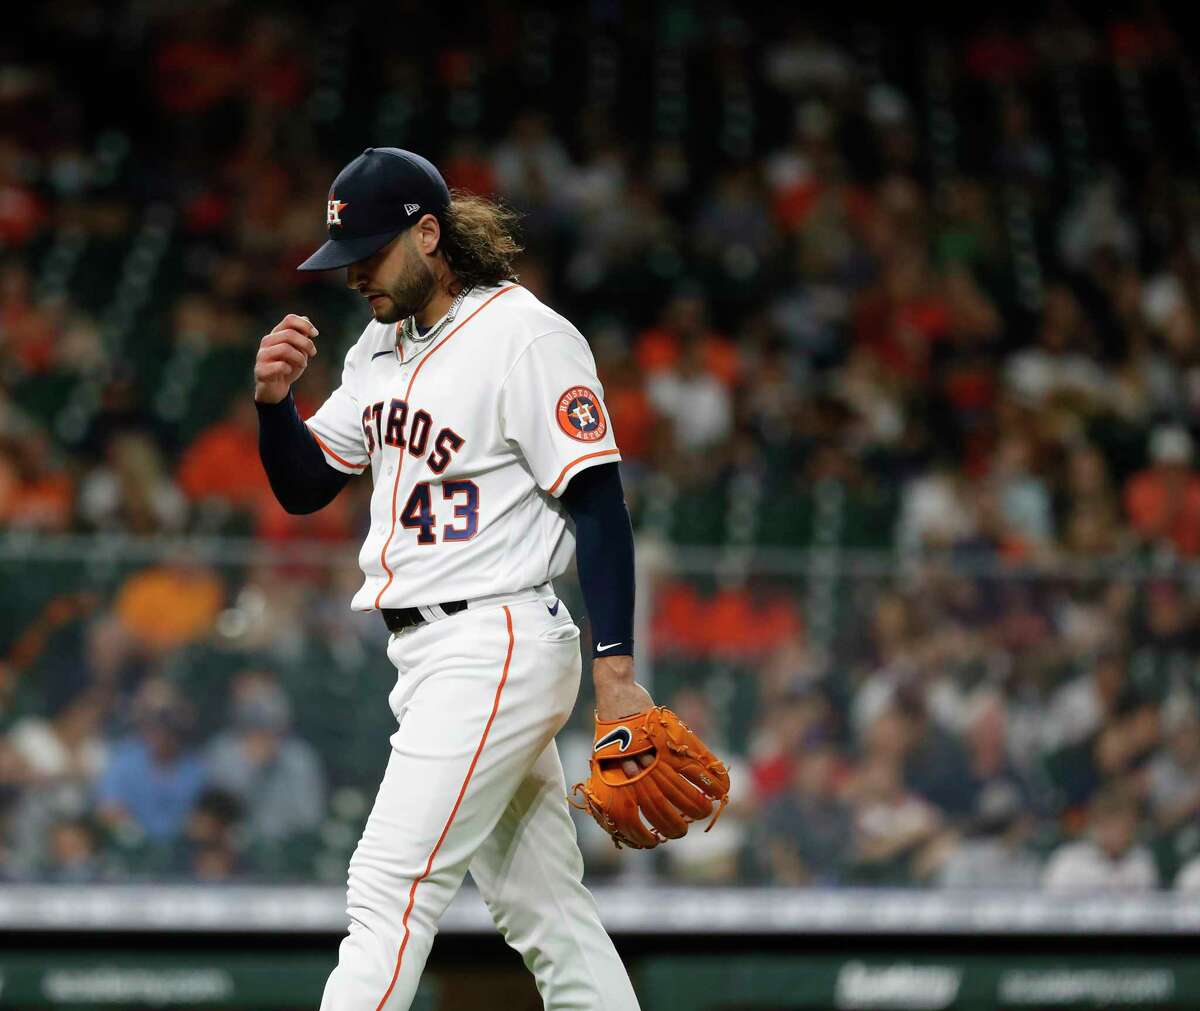 Lance McCullers Jr. turned in eight innings of one-run ball Tuesday night to match Shohei Ohtani before the Astros' bats won the game against the Angels' bullpen.